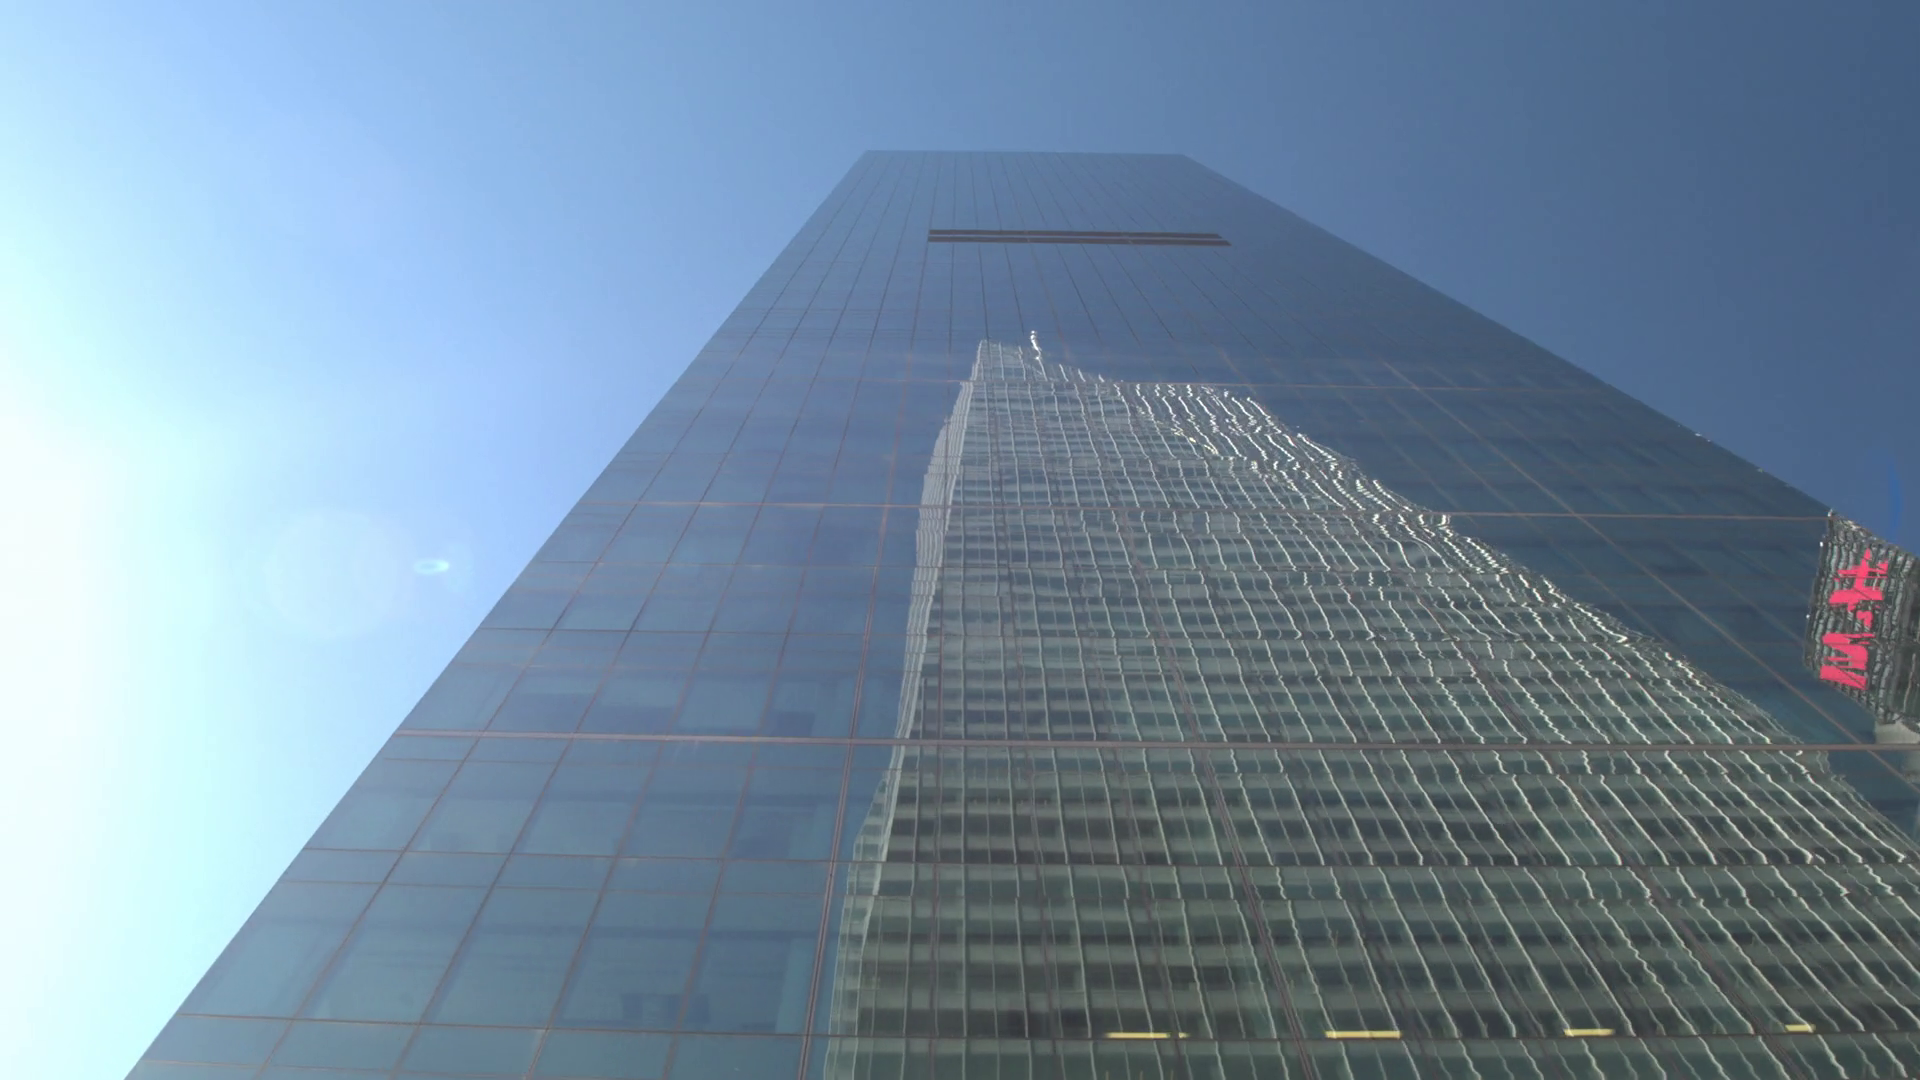 CLOSE UP: Iconic 1 WTC building reflecting in glassy skyscraper on ...